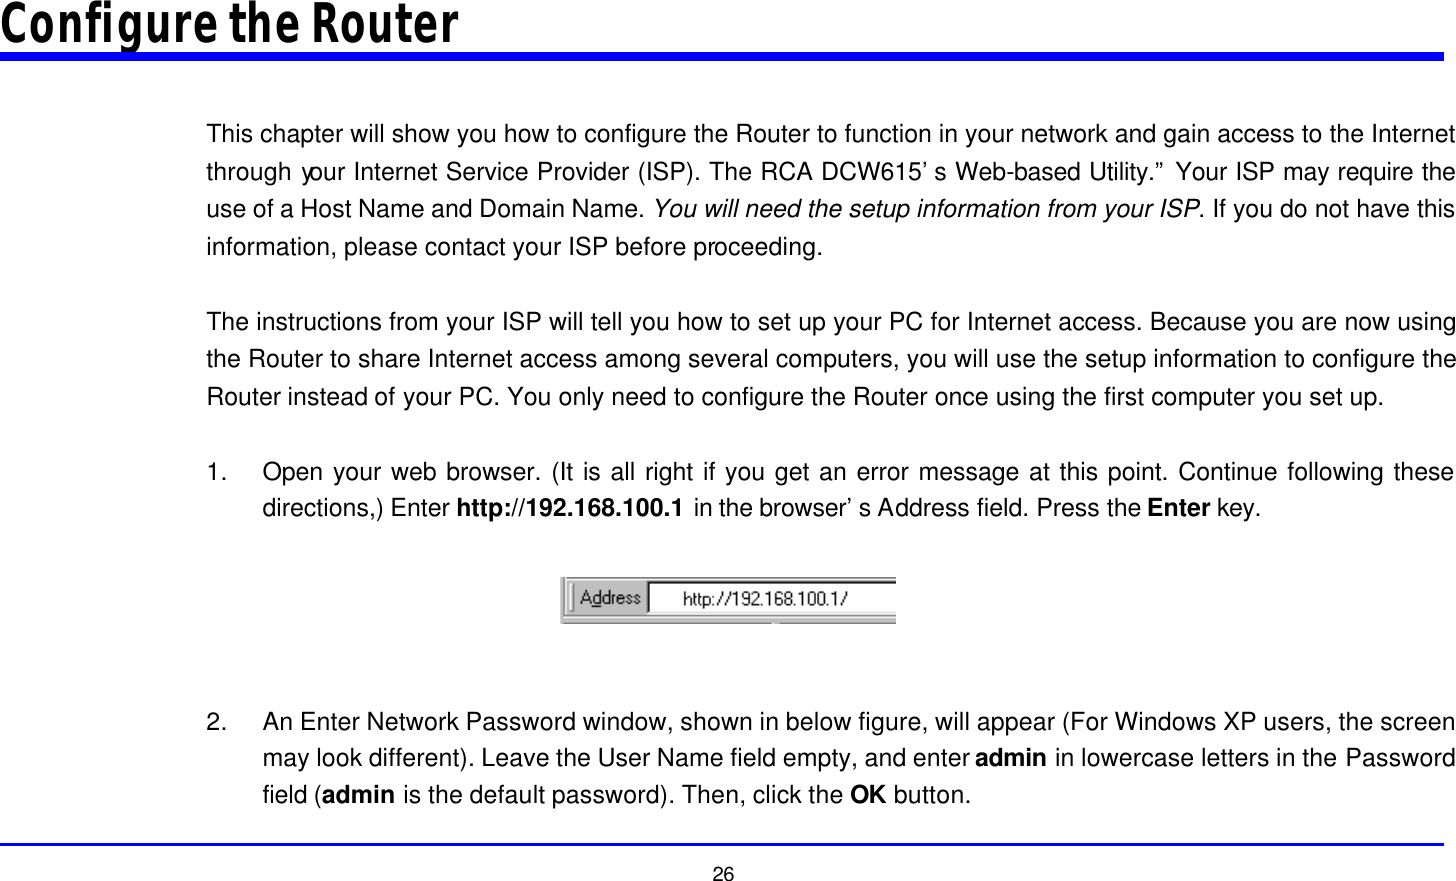  26 Configure the Router  This chapter will show you how to configure the Router to function in your network and gain access to the Internet through your Internet Service Provider (ISP). The RCA DCW615’s Web-based Utility.” Your ISP may require the use of a Host Name and Domain Name. You will need the setup information from your ISP. If you do not have this information, please contact your ISP before proceeding.  The instructions from your ISP will tell you how to set up your PC for Internet access. Because you are now using the Router to share Internet access among several computers, you will use the setup information to configure the Router instead of your PC. You only need to configure the Router once using the first computer you set up.  1. Open your web browser. (It is all right if you get an error message at this point. Continue following these directions,) Enter http://192.168.100.1 in the browser’s Address field. Press the Enter key.    2. An Enter Network Password window, shown in below figure, will appear (For Windows XP users, the screen may look different). Leave the User Name field empty, and enter admin in lowercase letters in the Password field (admin is the default password). Then, click the OK button. 